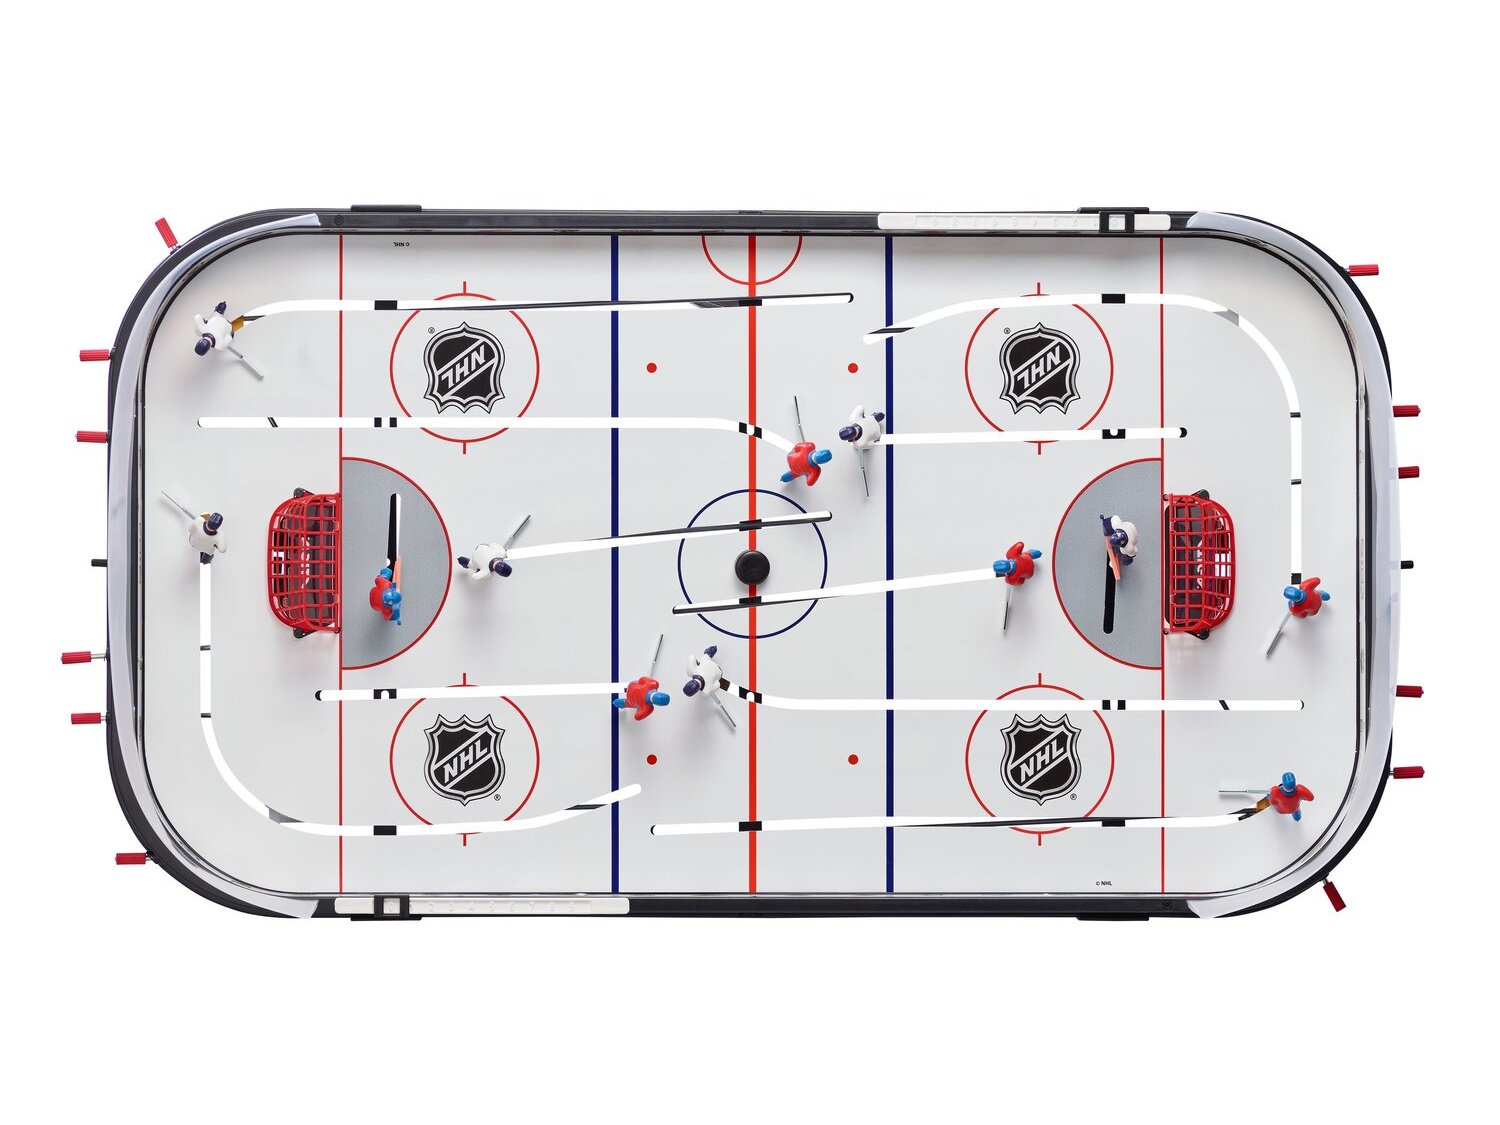  NHL Stanley Cup Hockey Table Game (Detroit Red Wings